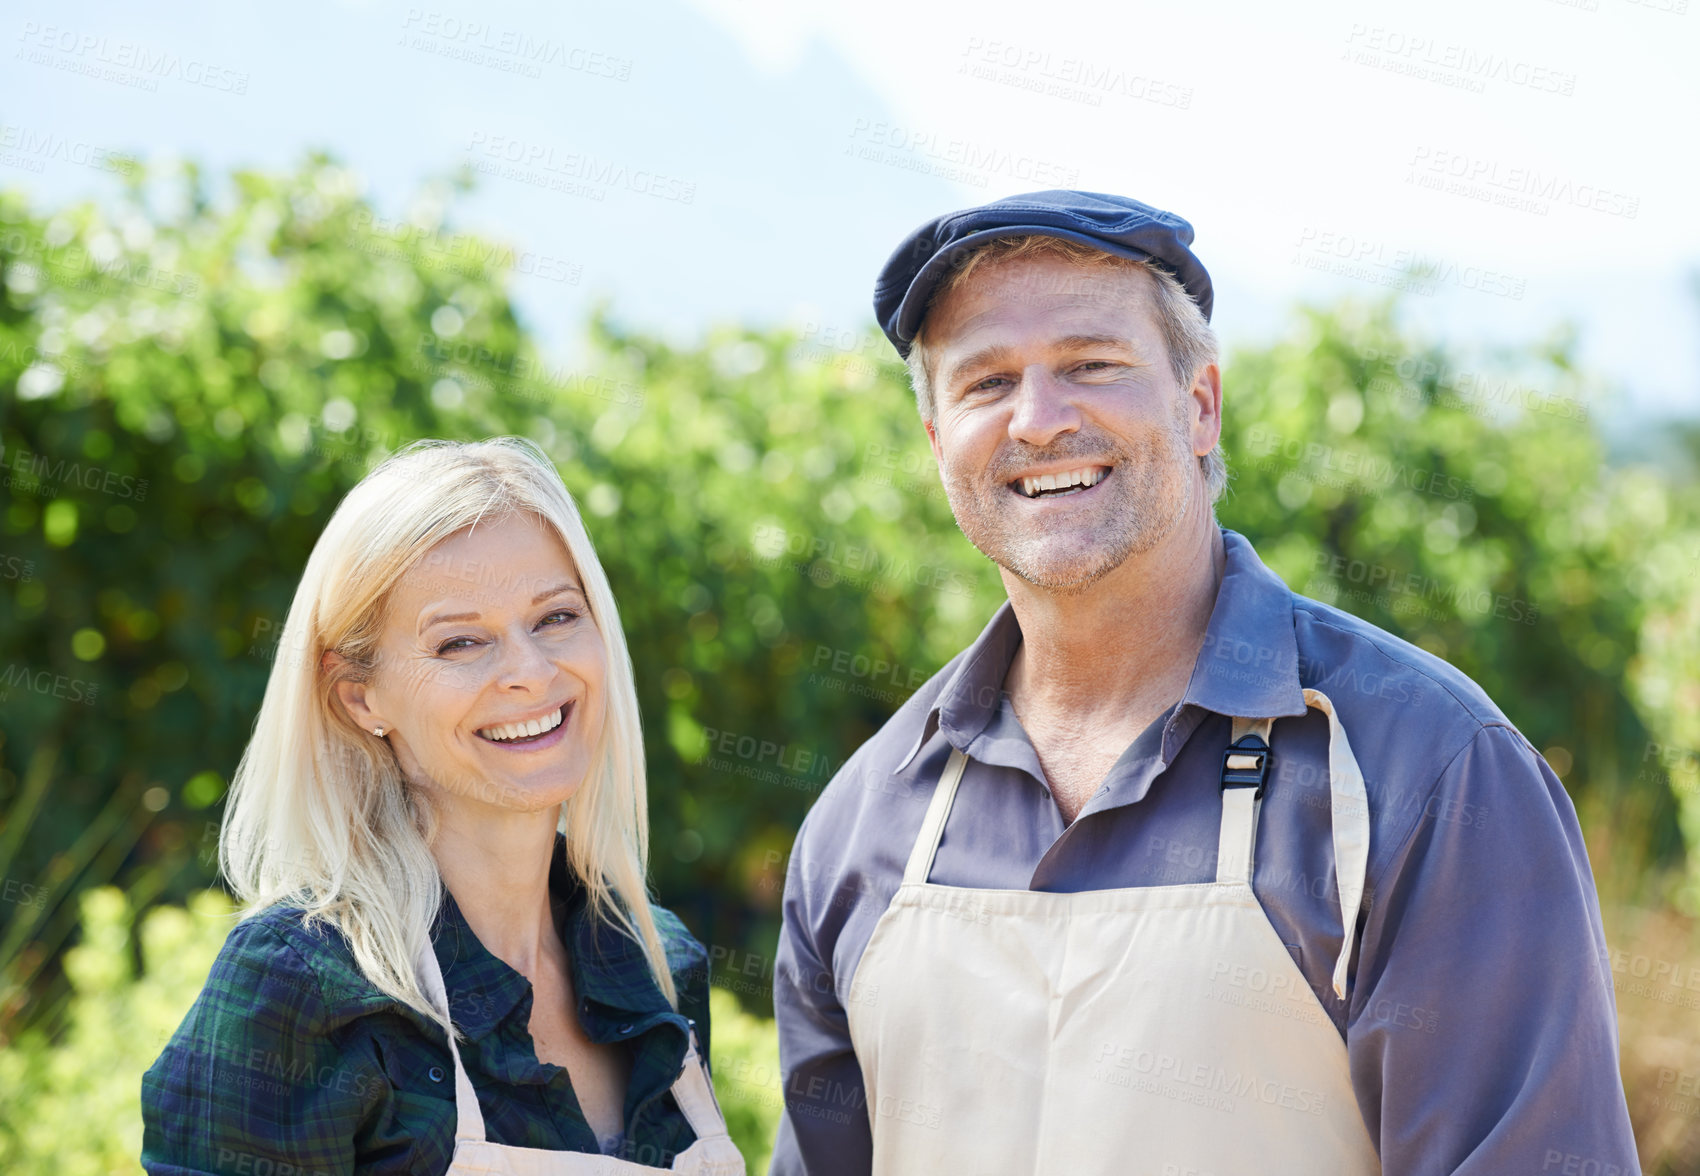 Buy stock photo Farming, portrait or happy couple with apron, smile and partnership in small business, growth or market. Team, man and woman with confidence for industry, owner and entrepreneur in career of farmers